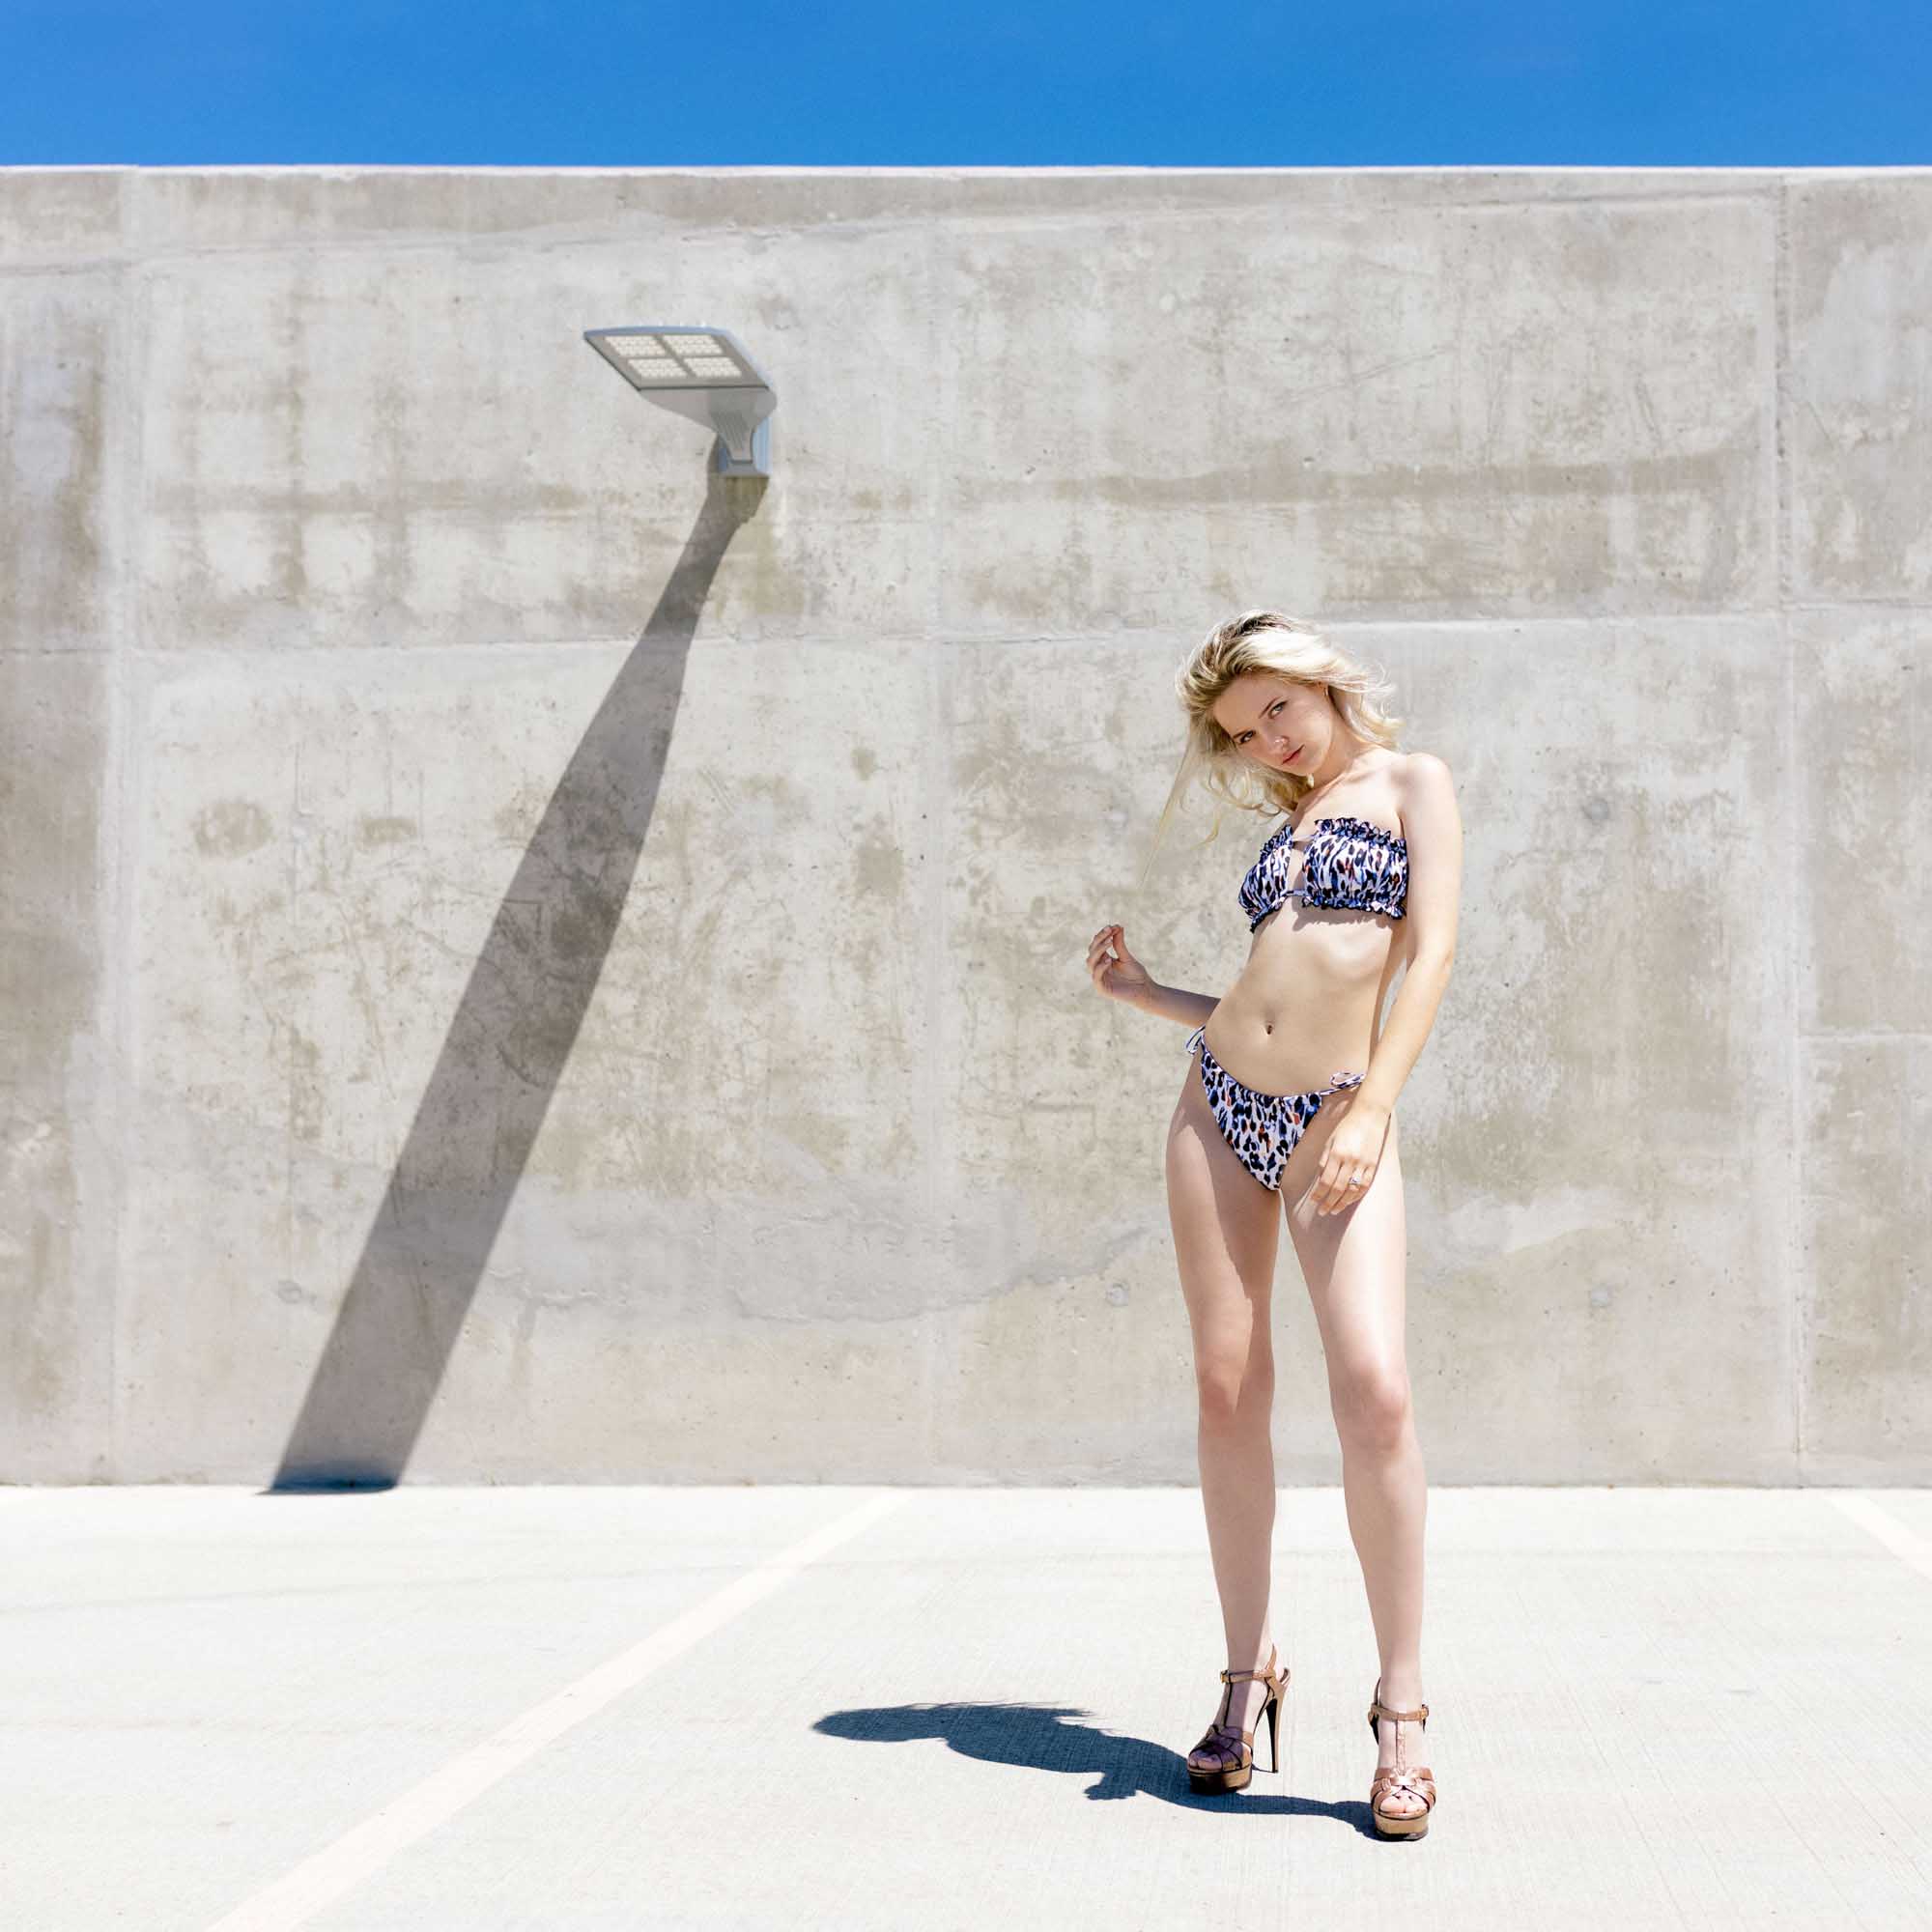 Model in bikini swimwear poses in parking lot with dramatic light and shadow | Meghan Travers @traversmeghan | Teen Model | Fashion Photography | Denver, Colorado